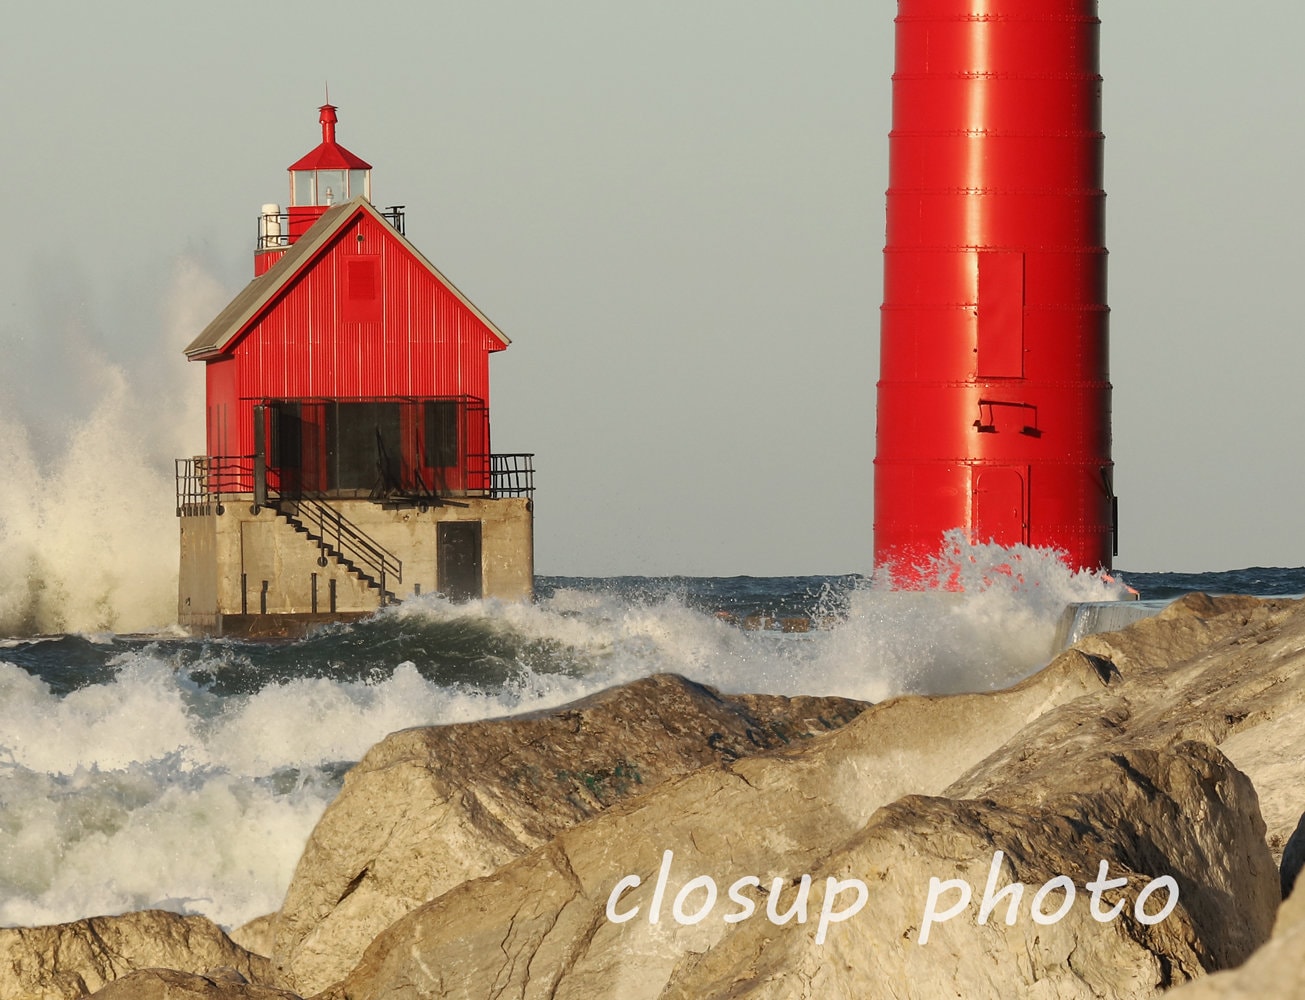 Grand Haven photo, red lighthouse print, nautical wall art decor, Lake Michigan photography, paper or canvas picture, 5x7 to 32x48 inches